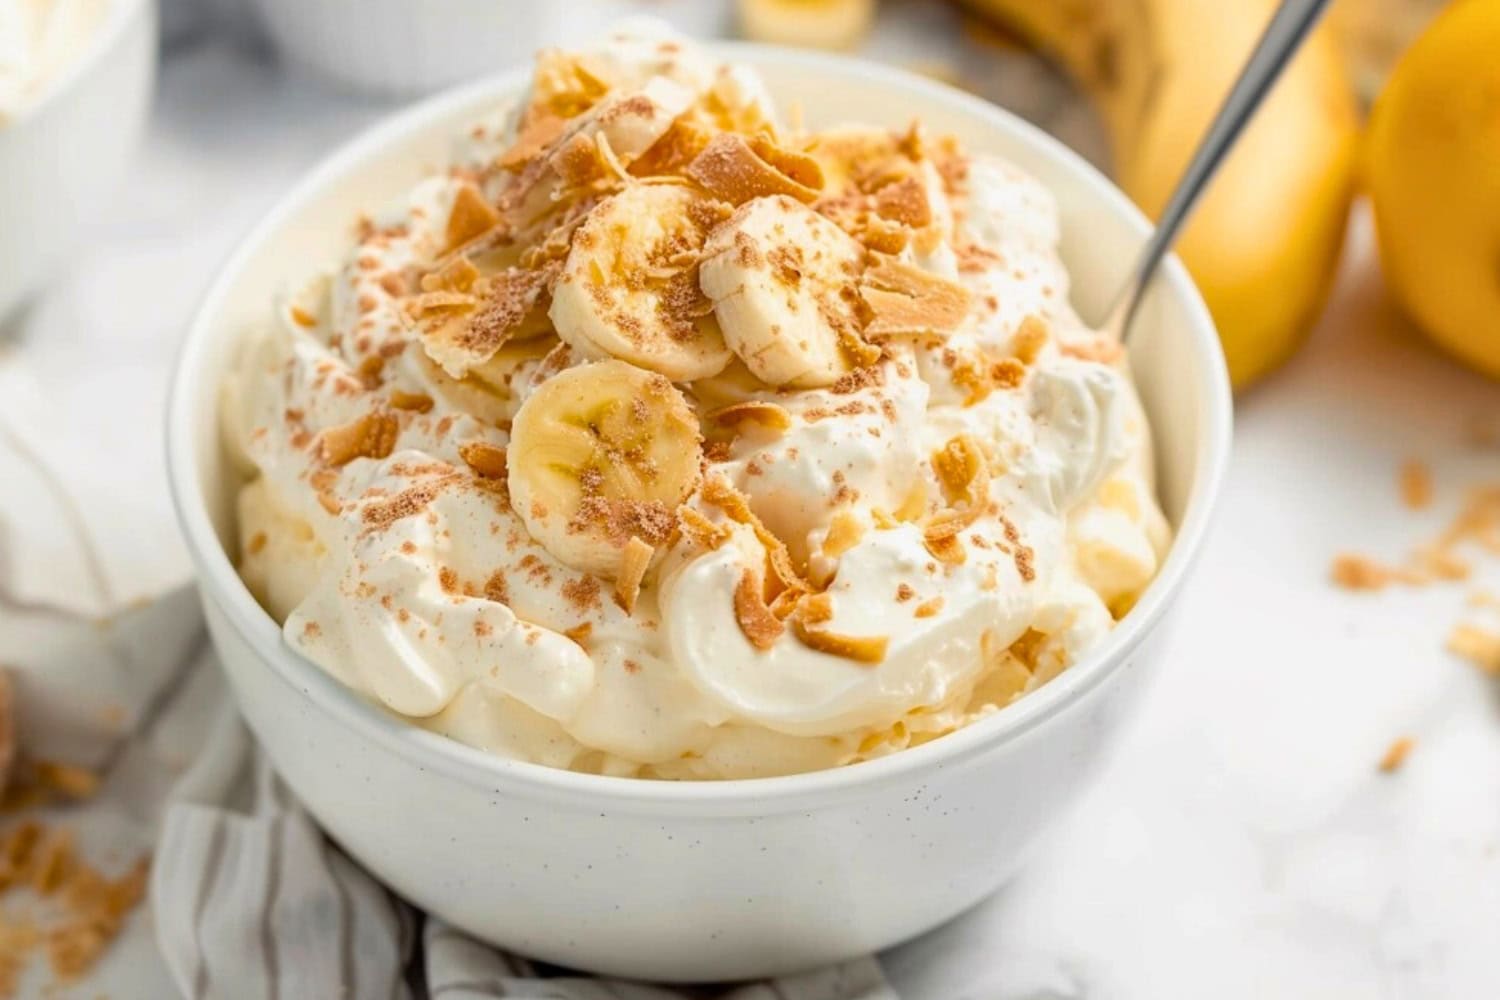 Fluffy pudding with banana slices in a bowl.